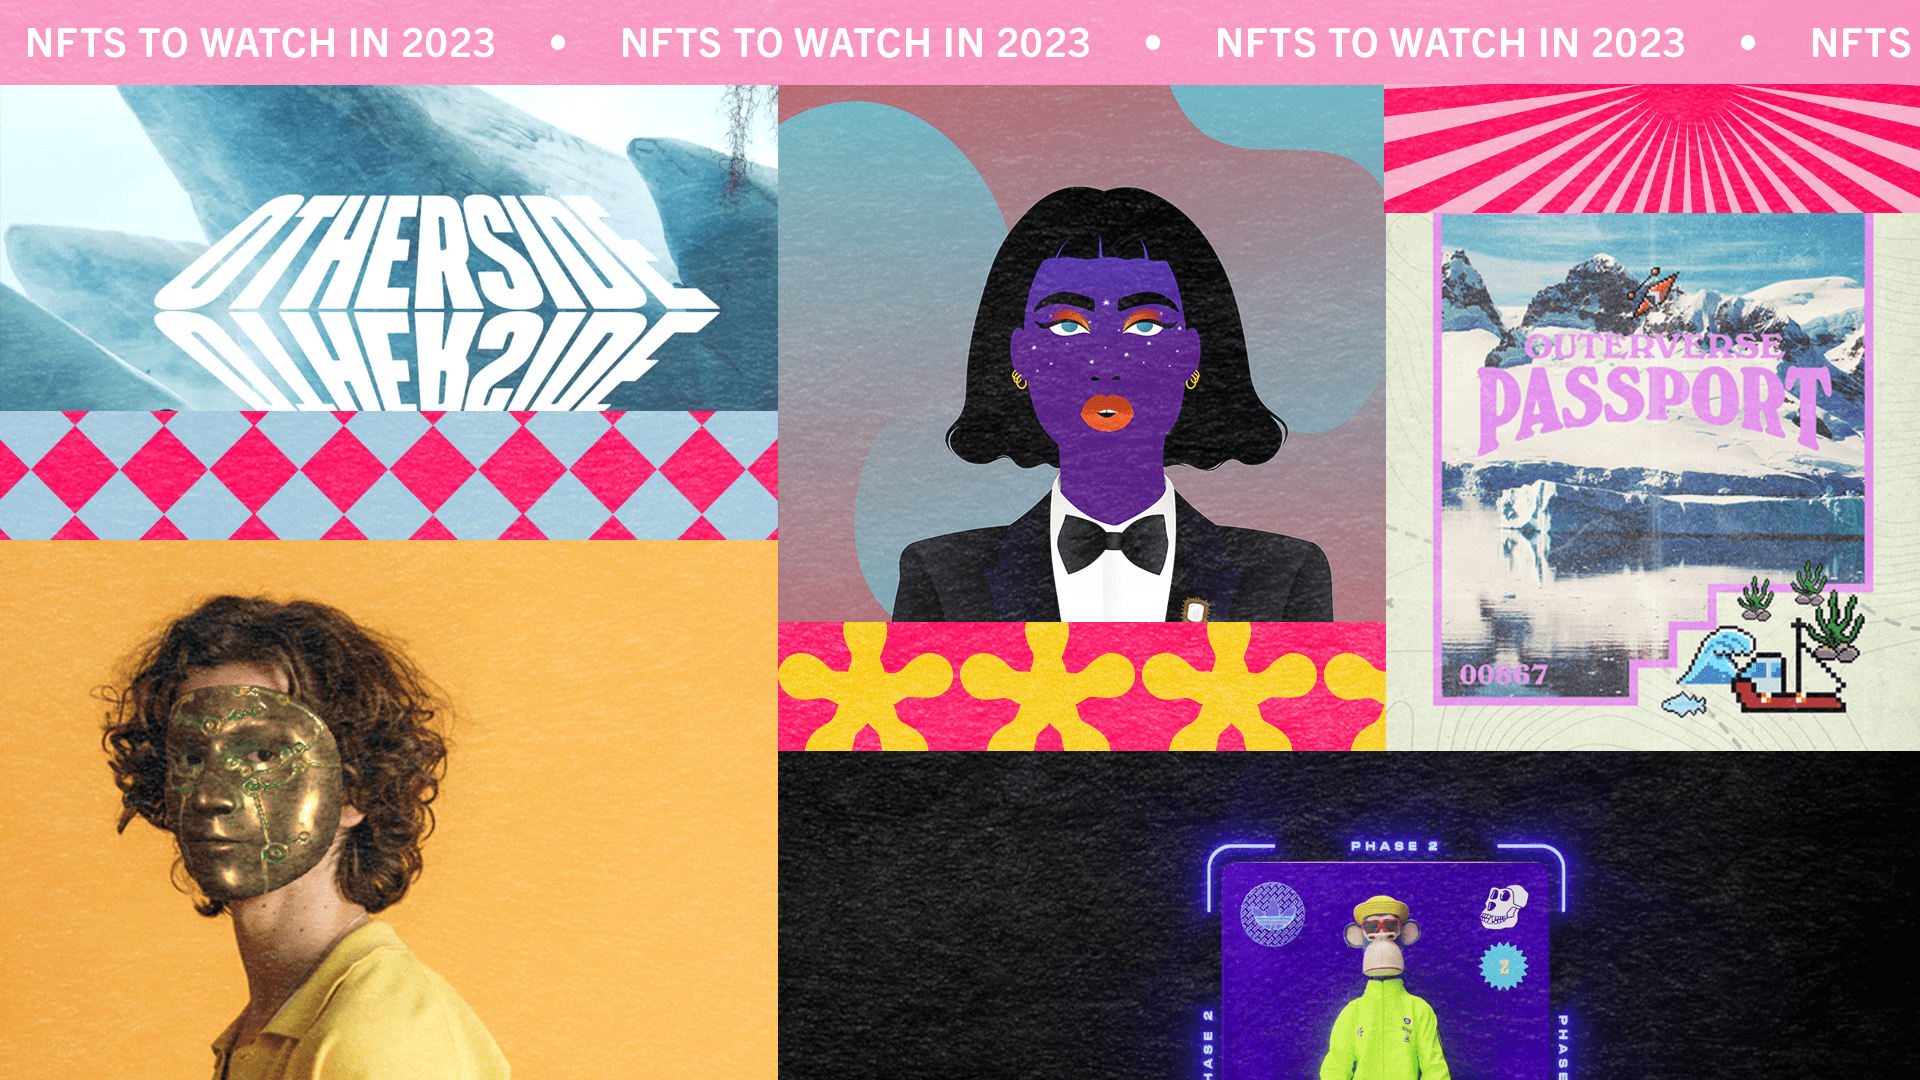 NFTs to Watch in 2023